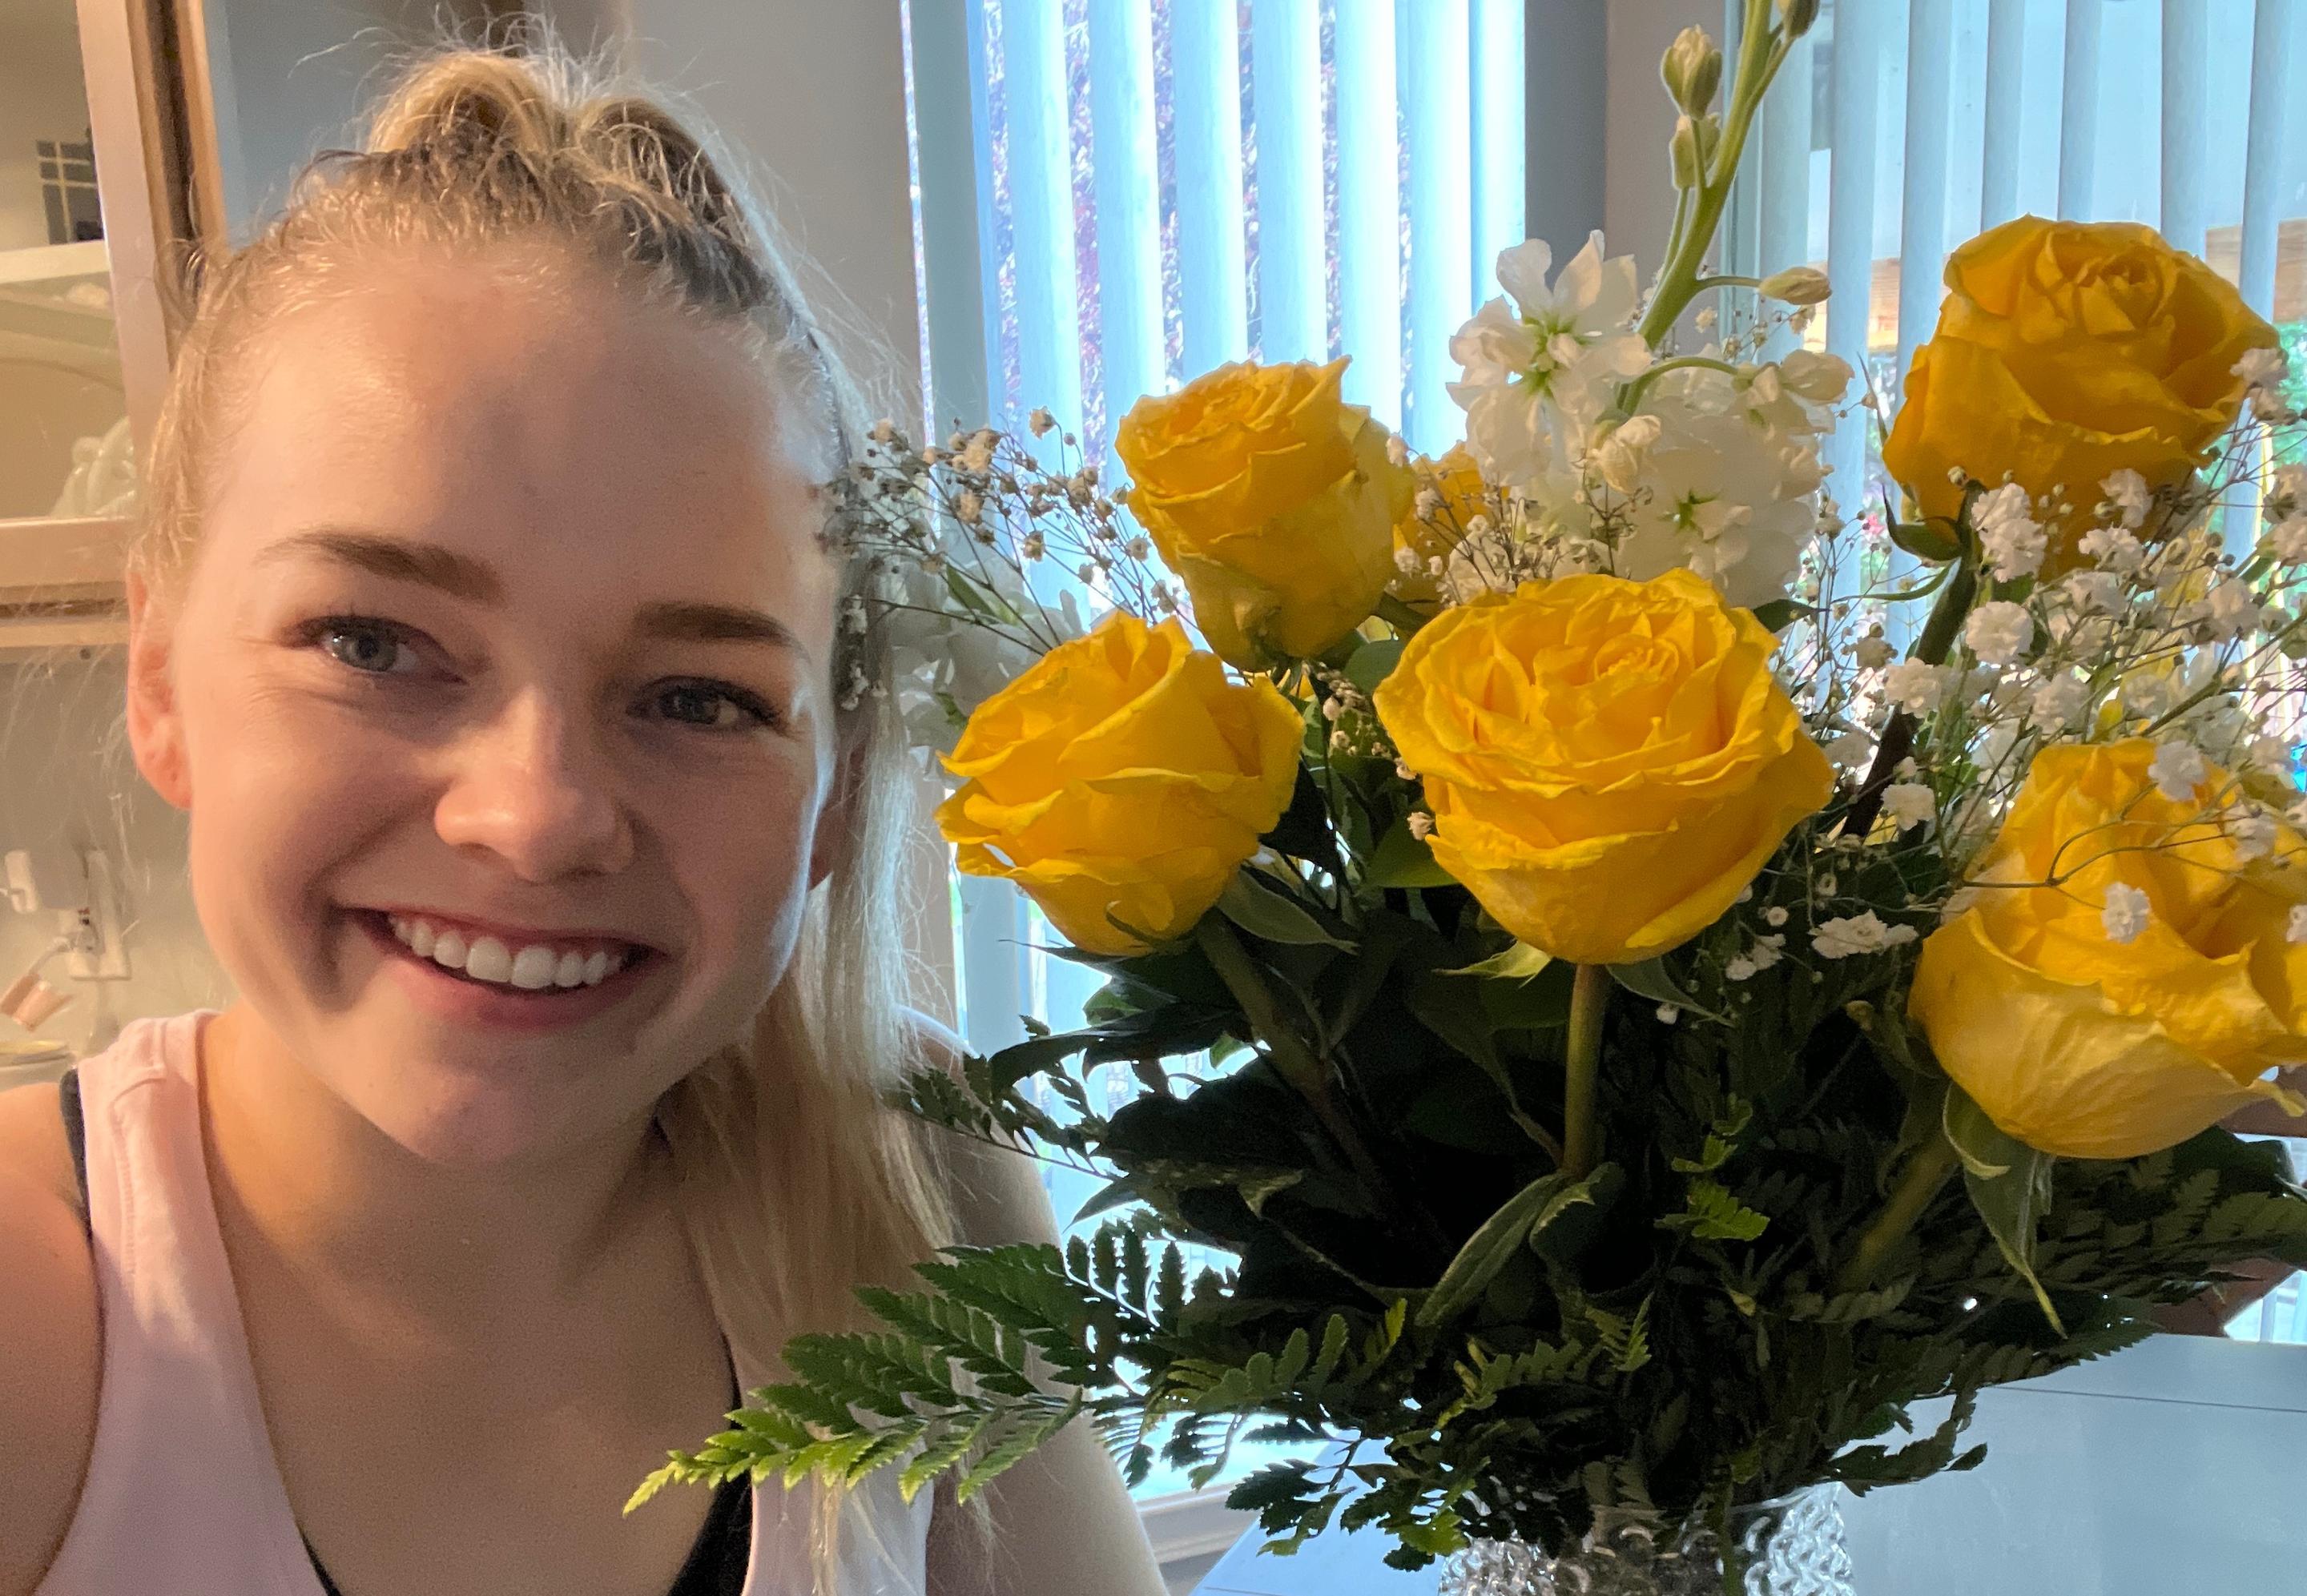 Woman smiling with yellow birthday roses on table in glass vase.